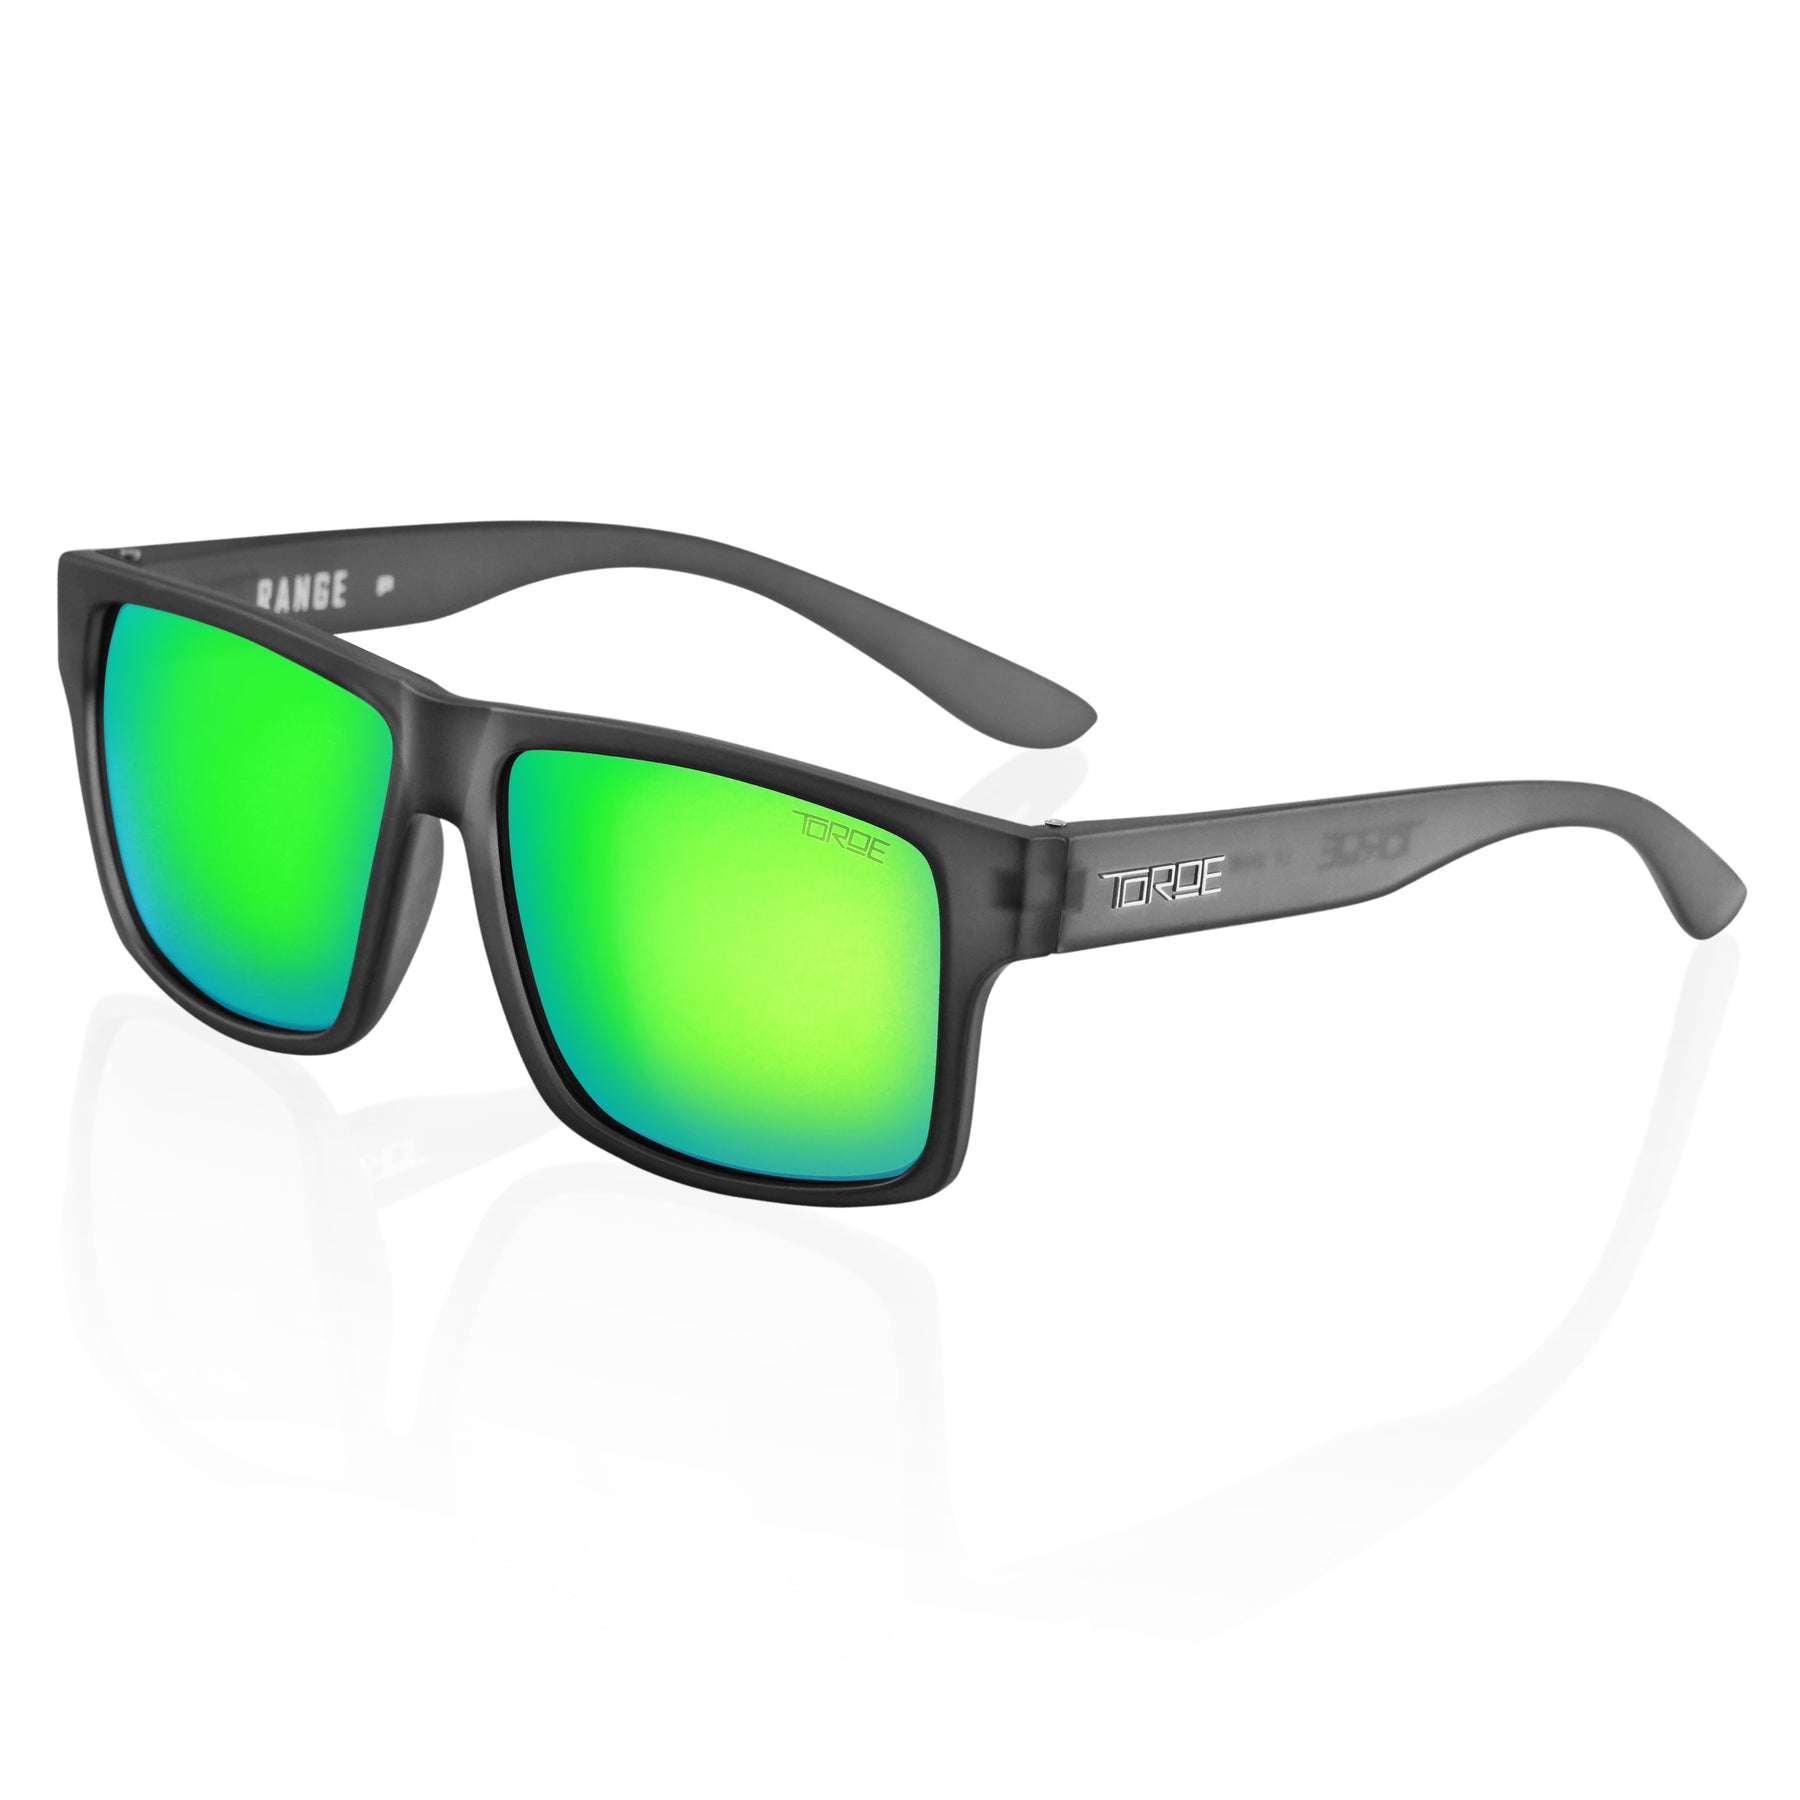 Exclusive Toroe 'Range' Polarized Sunglasses with Lifetime Warranty Frost Gray / Midnight Green Lens